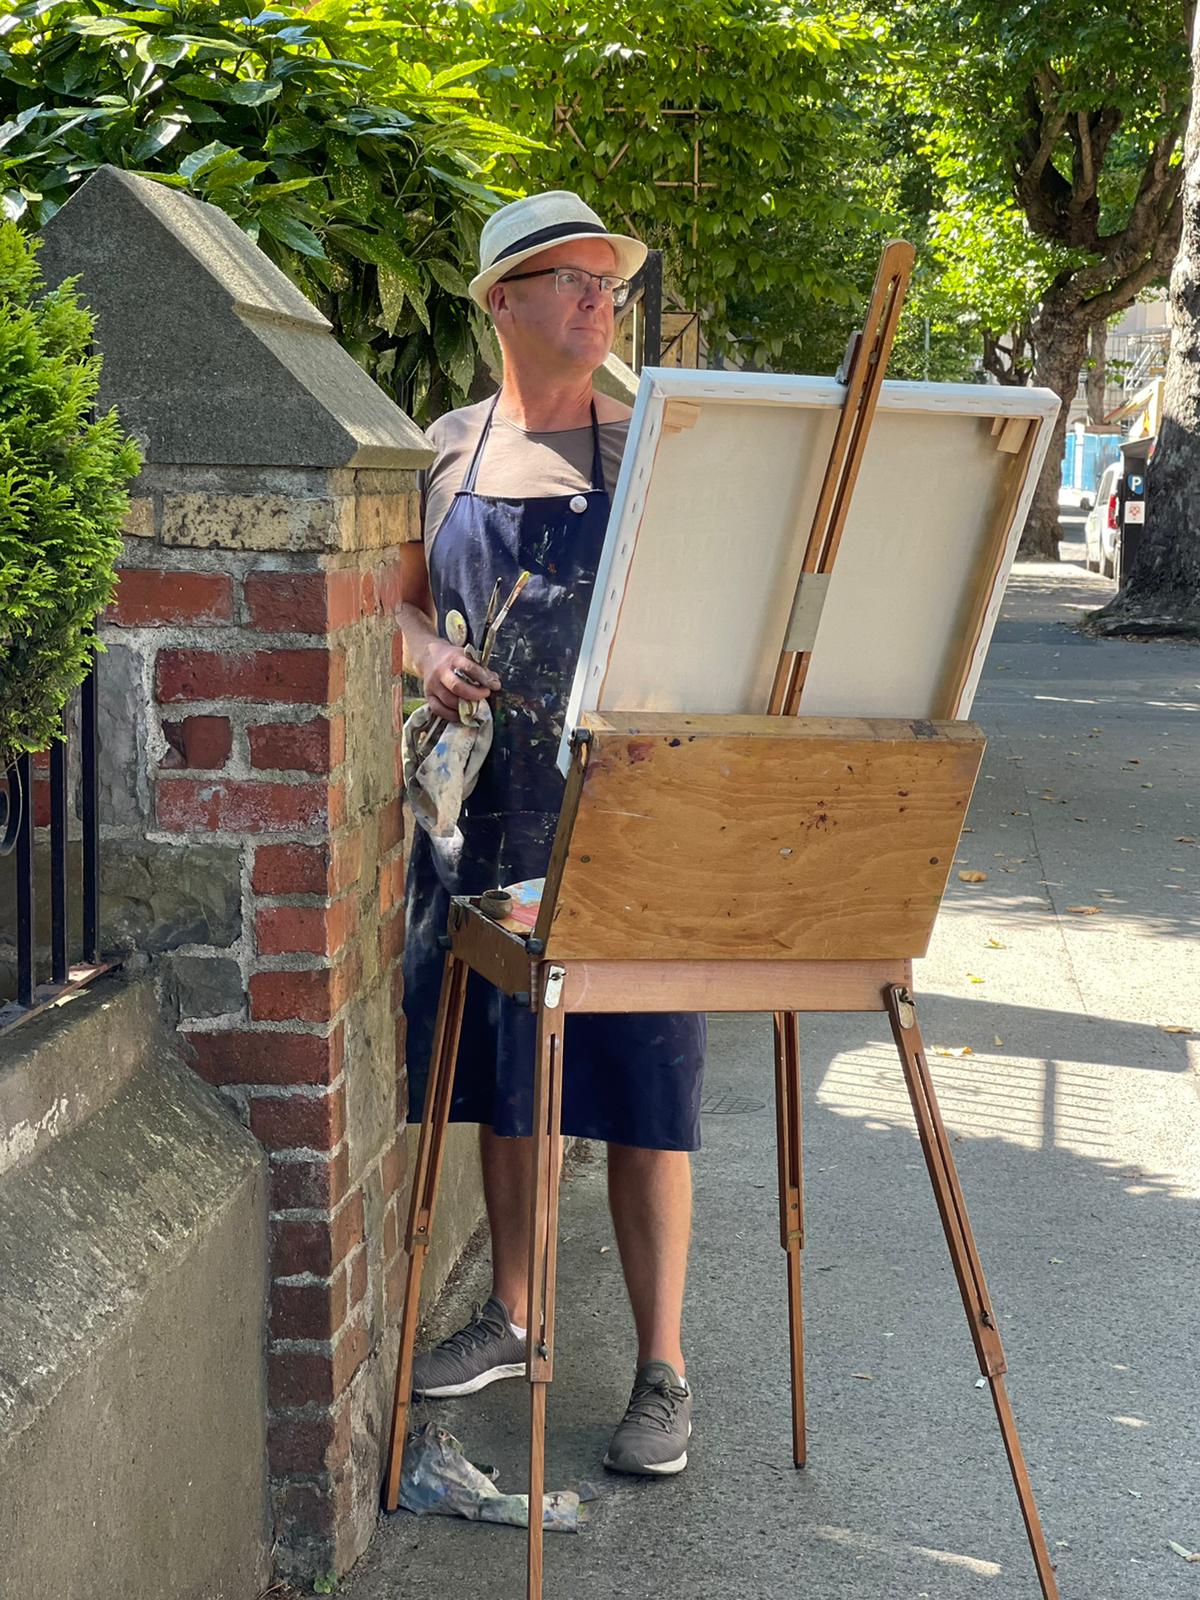 Ed Reynolds painting outside the Royal Victoria Eye & Ear Hospital in August 